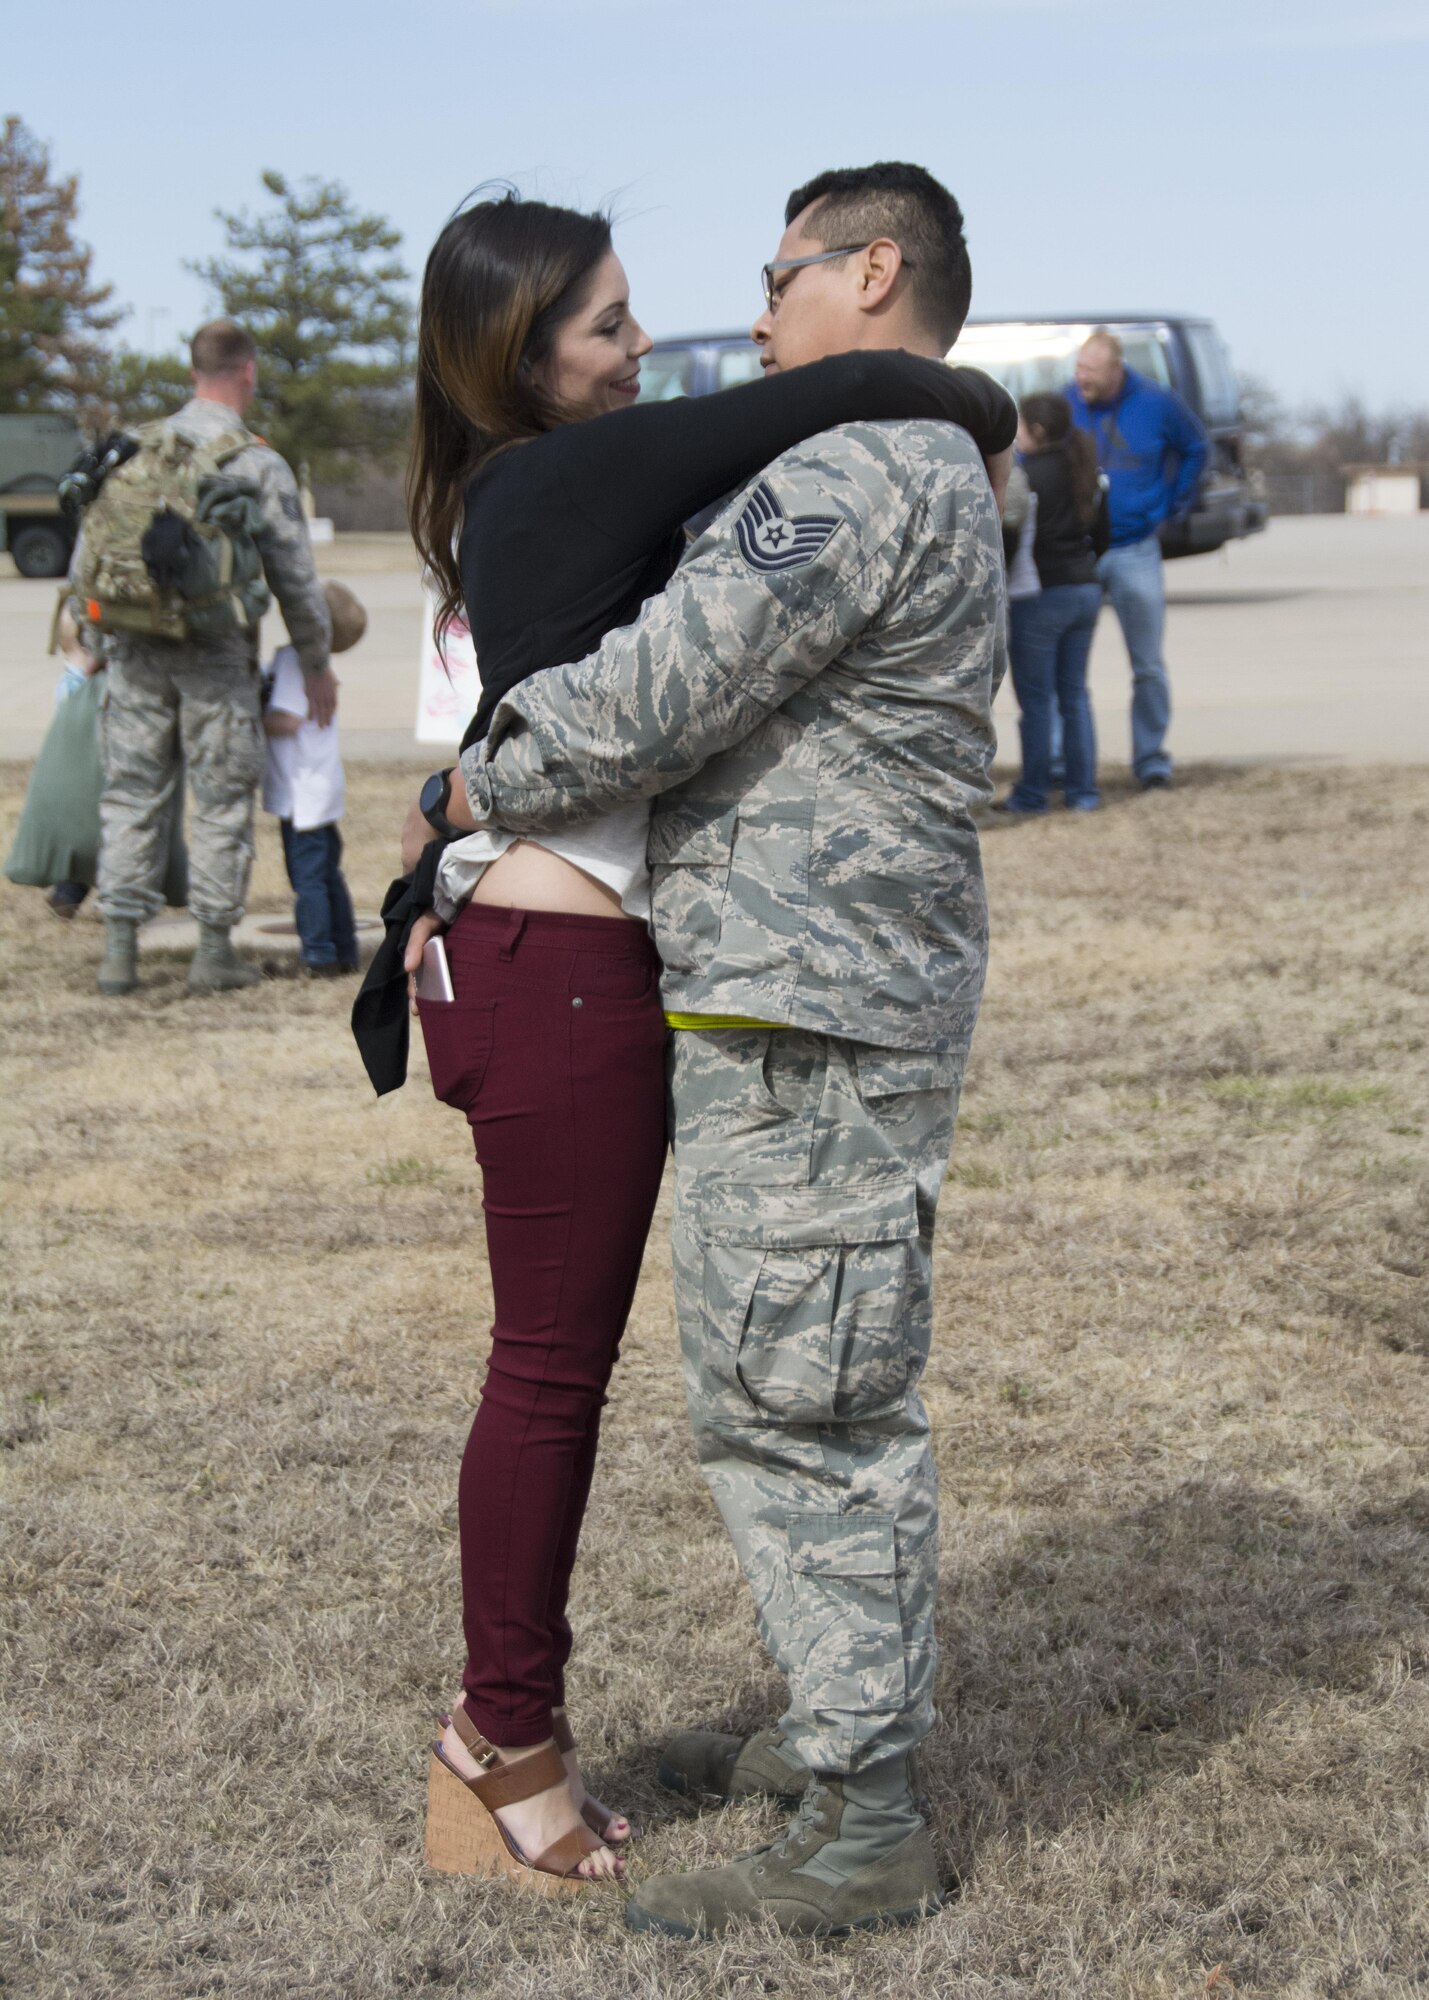 Tech. Sgt. Jose Martinez of the 507th Aircraft Maintenance Squadron and his wife, Cecilia, embrace following a deployment Feb. 17, 2017, at Tinker Air Force Base, Okla. More than 90 Reservists deployed in December 2016 in support of air operations at Incirlik Air Base, Turkey, against the Islamic State group. (U.S. Air Force photo/Tech. Sgt. Lauren Gleason)